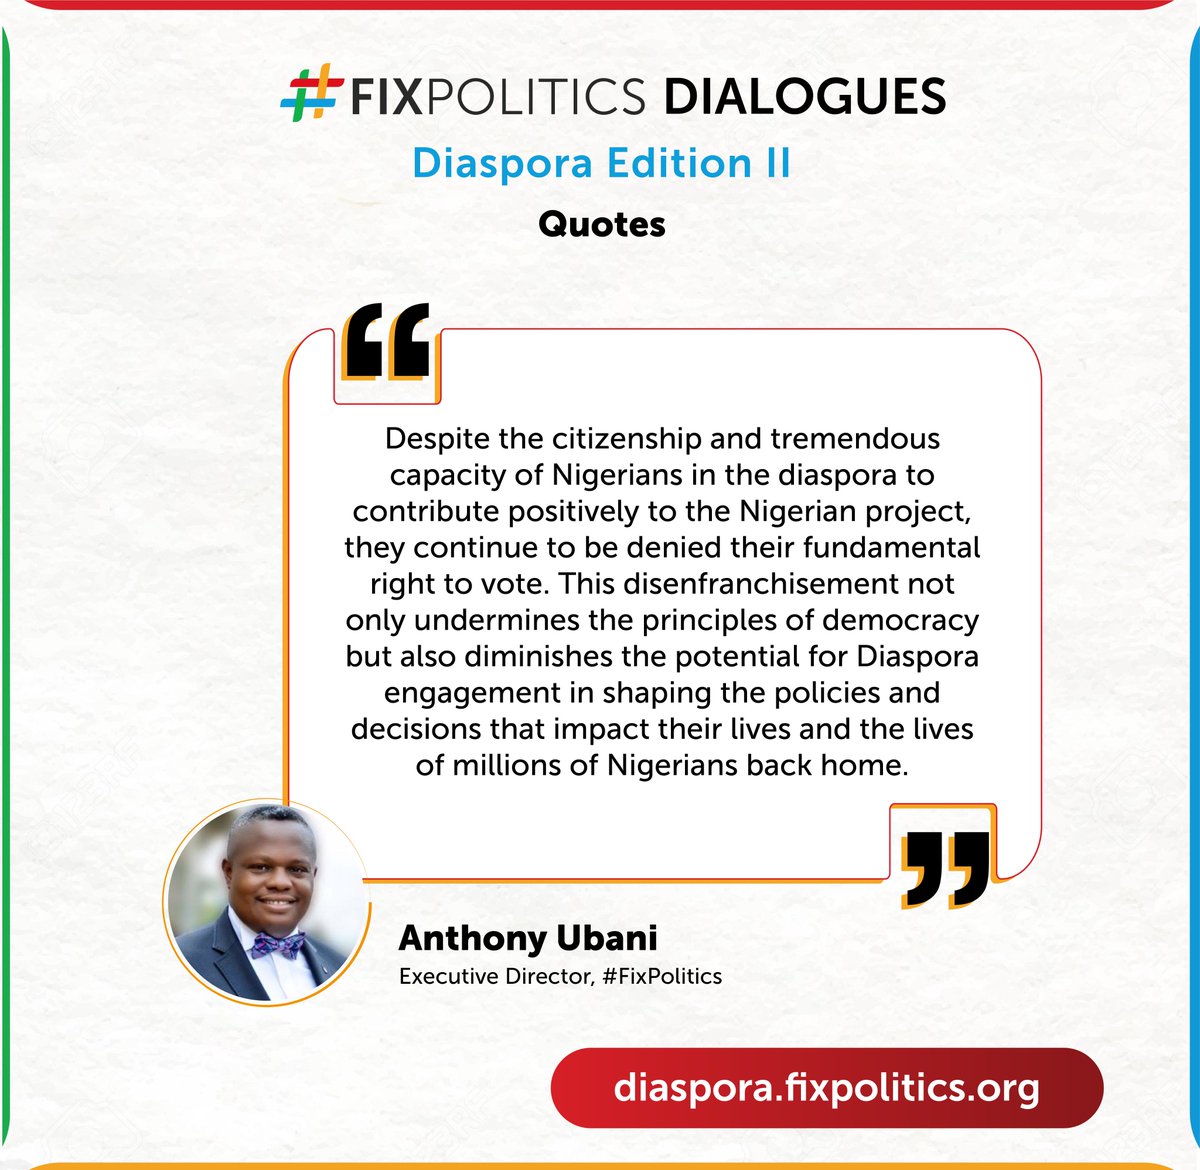 'Despite the citizenship and tremendous capacity of Nigerians in the diaspora to contribute positively to the Nigerian project, they continue to be denied the rite to vote' - Anthony Ubani @AnthonyUbani1 at the #FixPolitics Diaspora Dialogue II. Watch out for the next edition.